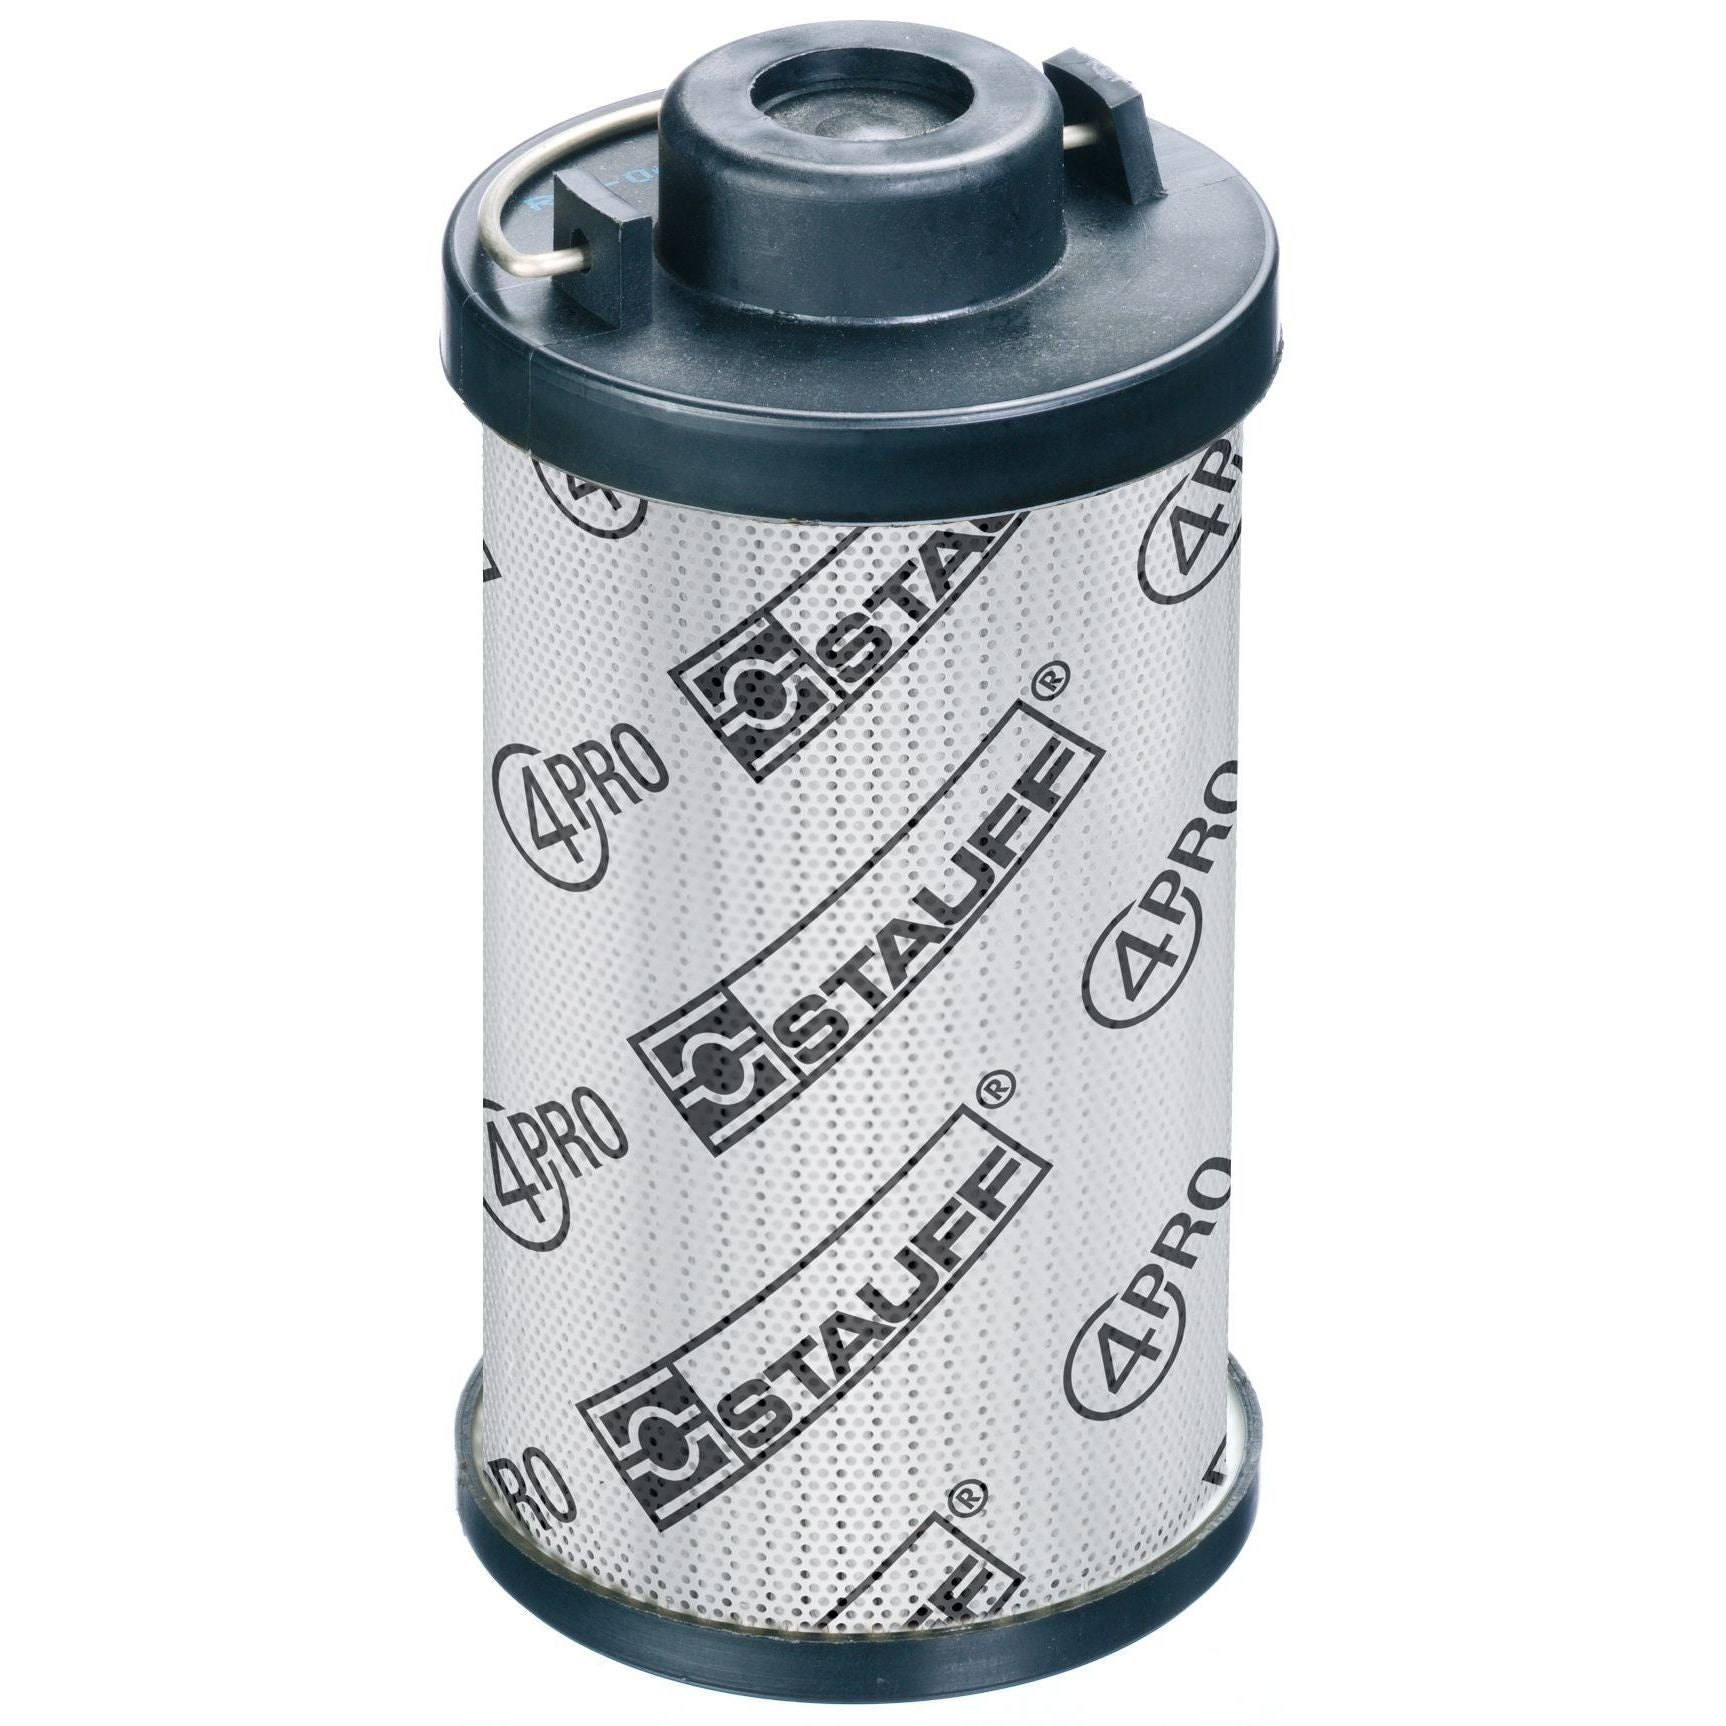 RE-130-G-05-B-B3/4 : Stauff RF-130 Series Filter Element, 5 Micron, Synthetic, 363psi Collapse Differential, Buna